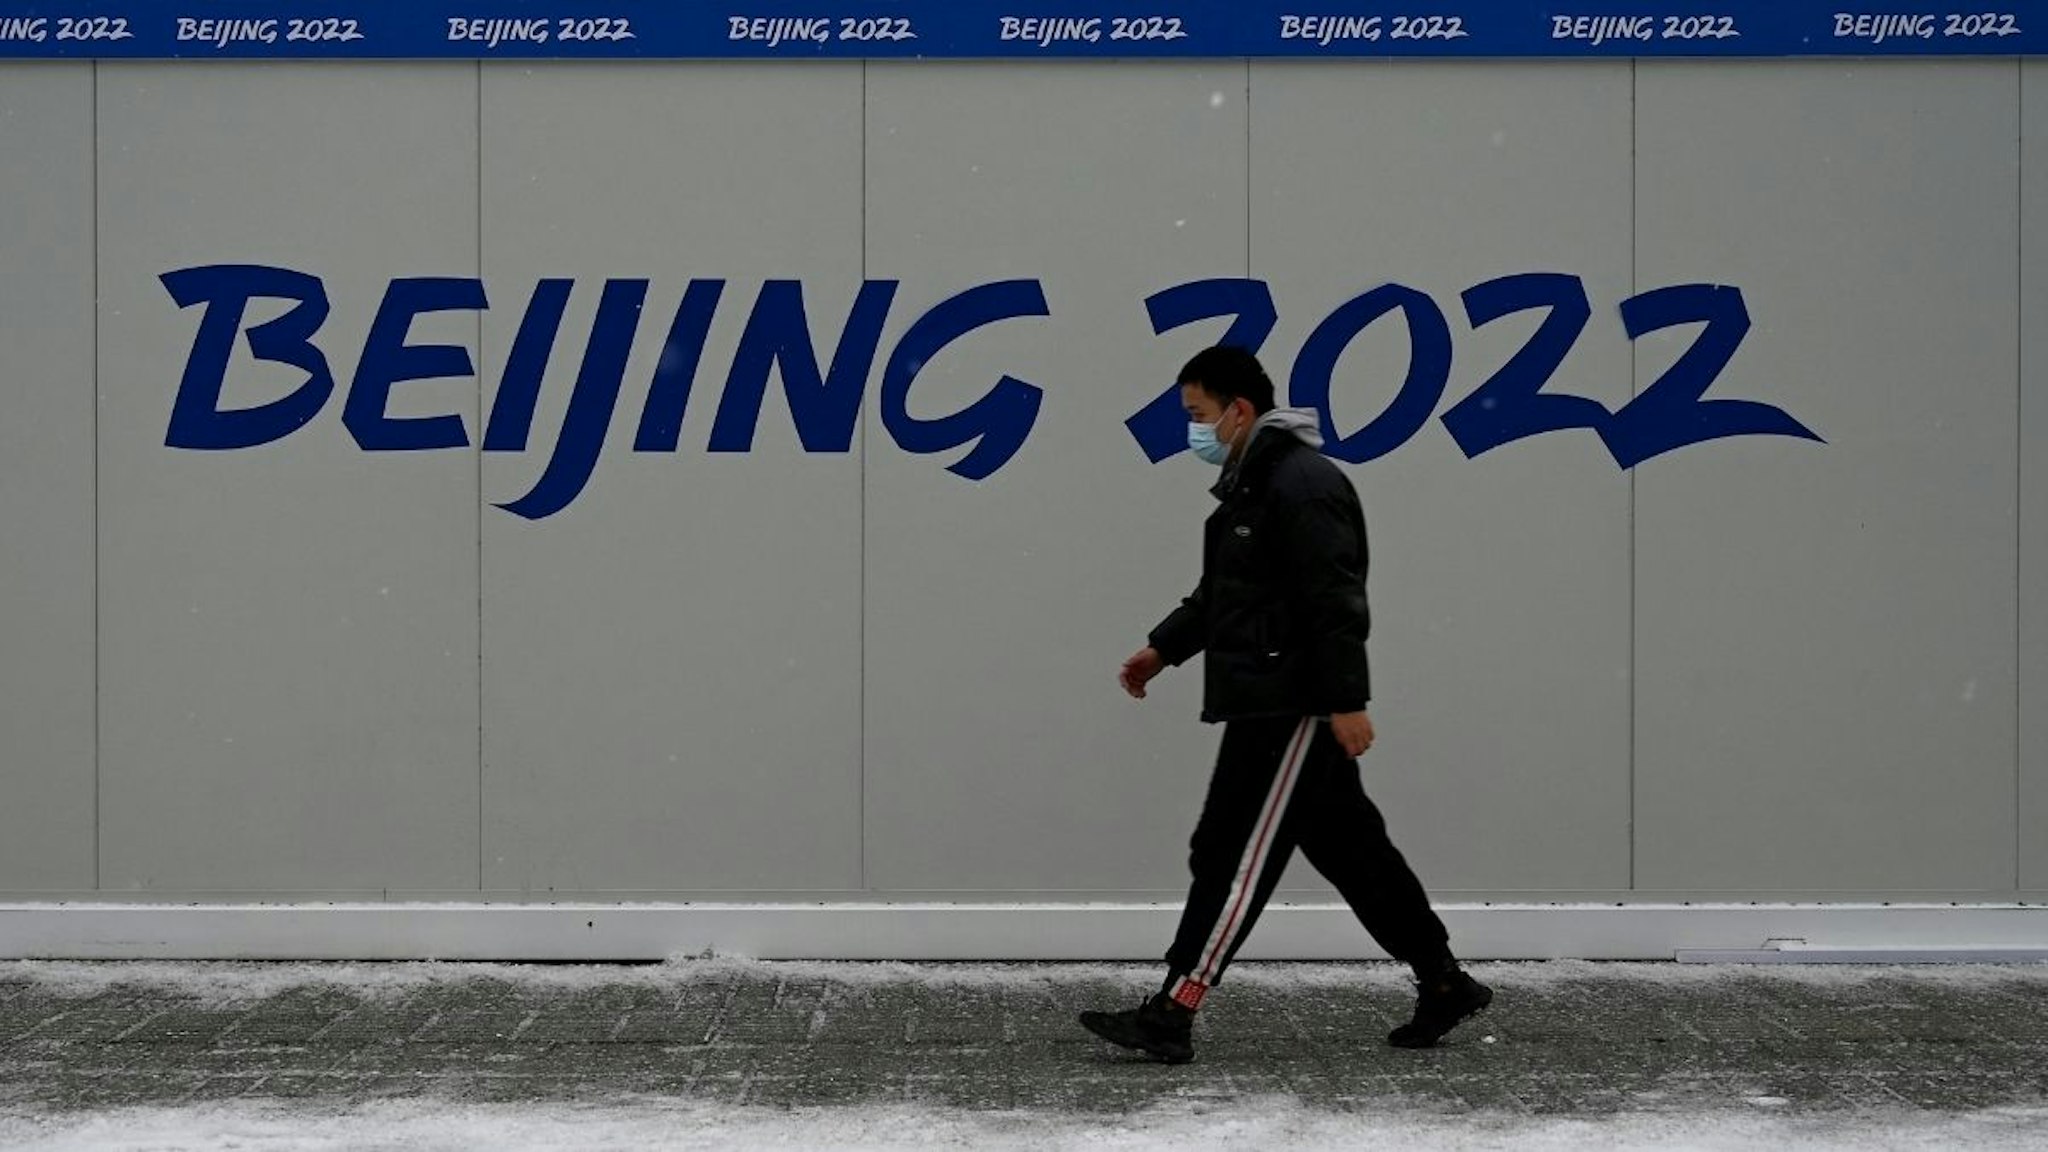 A man walks past a promotion for the 2022 Beijing Winter Olympic Games, at the Olympic Park, two weeks before the start of the 2022 Beijing Winter Olympic Games, on a snowy day in Beijing on January 20, 2022.